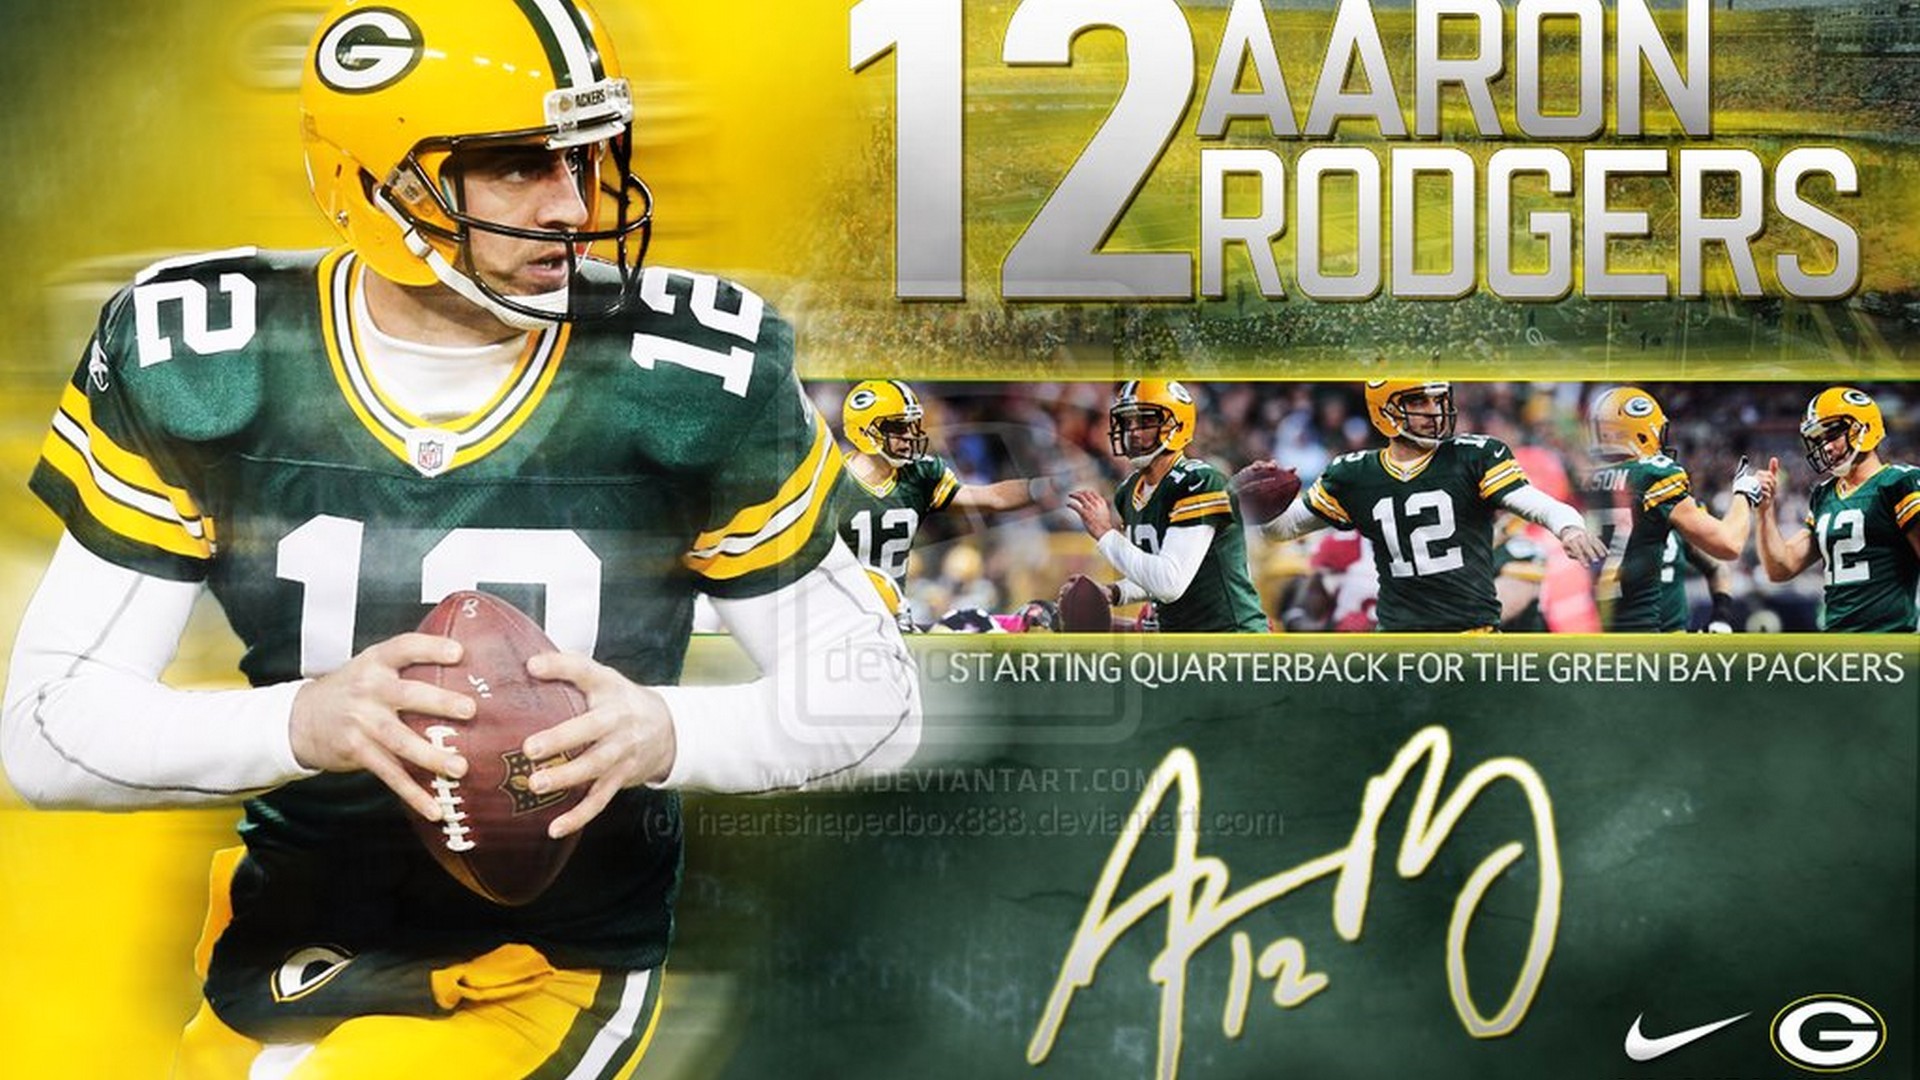 HD Desktop Wallpaper Aaron Rodgers With high-resolution 1920X1080 pixel. You can use this wallpaper for your Mac or Windows Desktop Background, iPhone, Android or Tablet and another Smartphone device